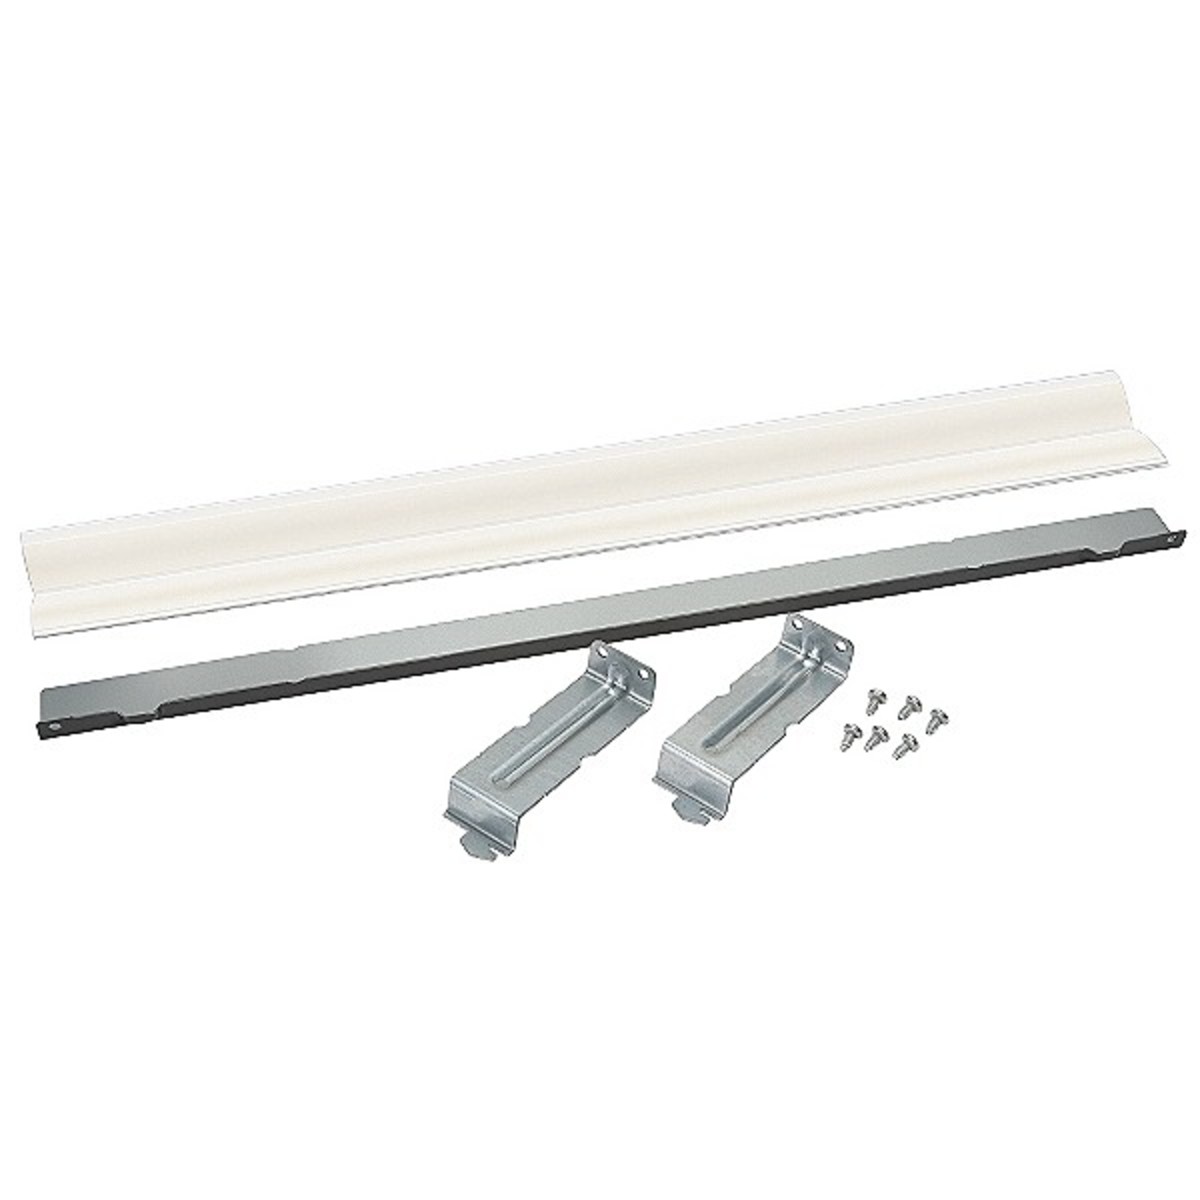 Frigidaire Washer and Dryer Stacking Kit. Part #STACKIT4X